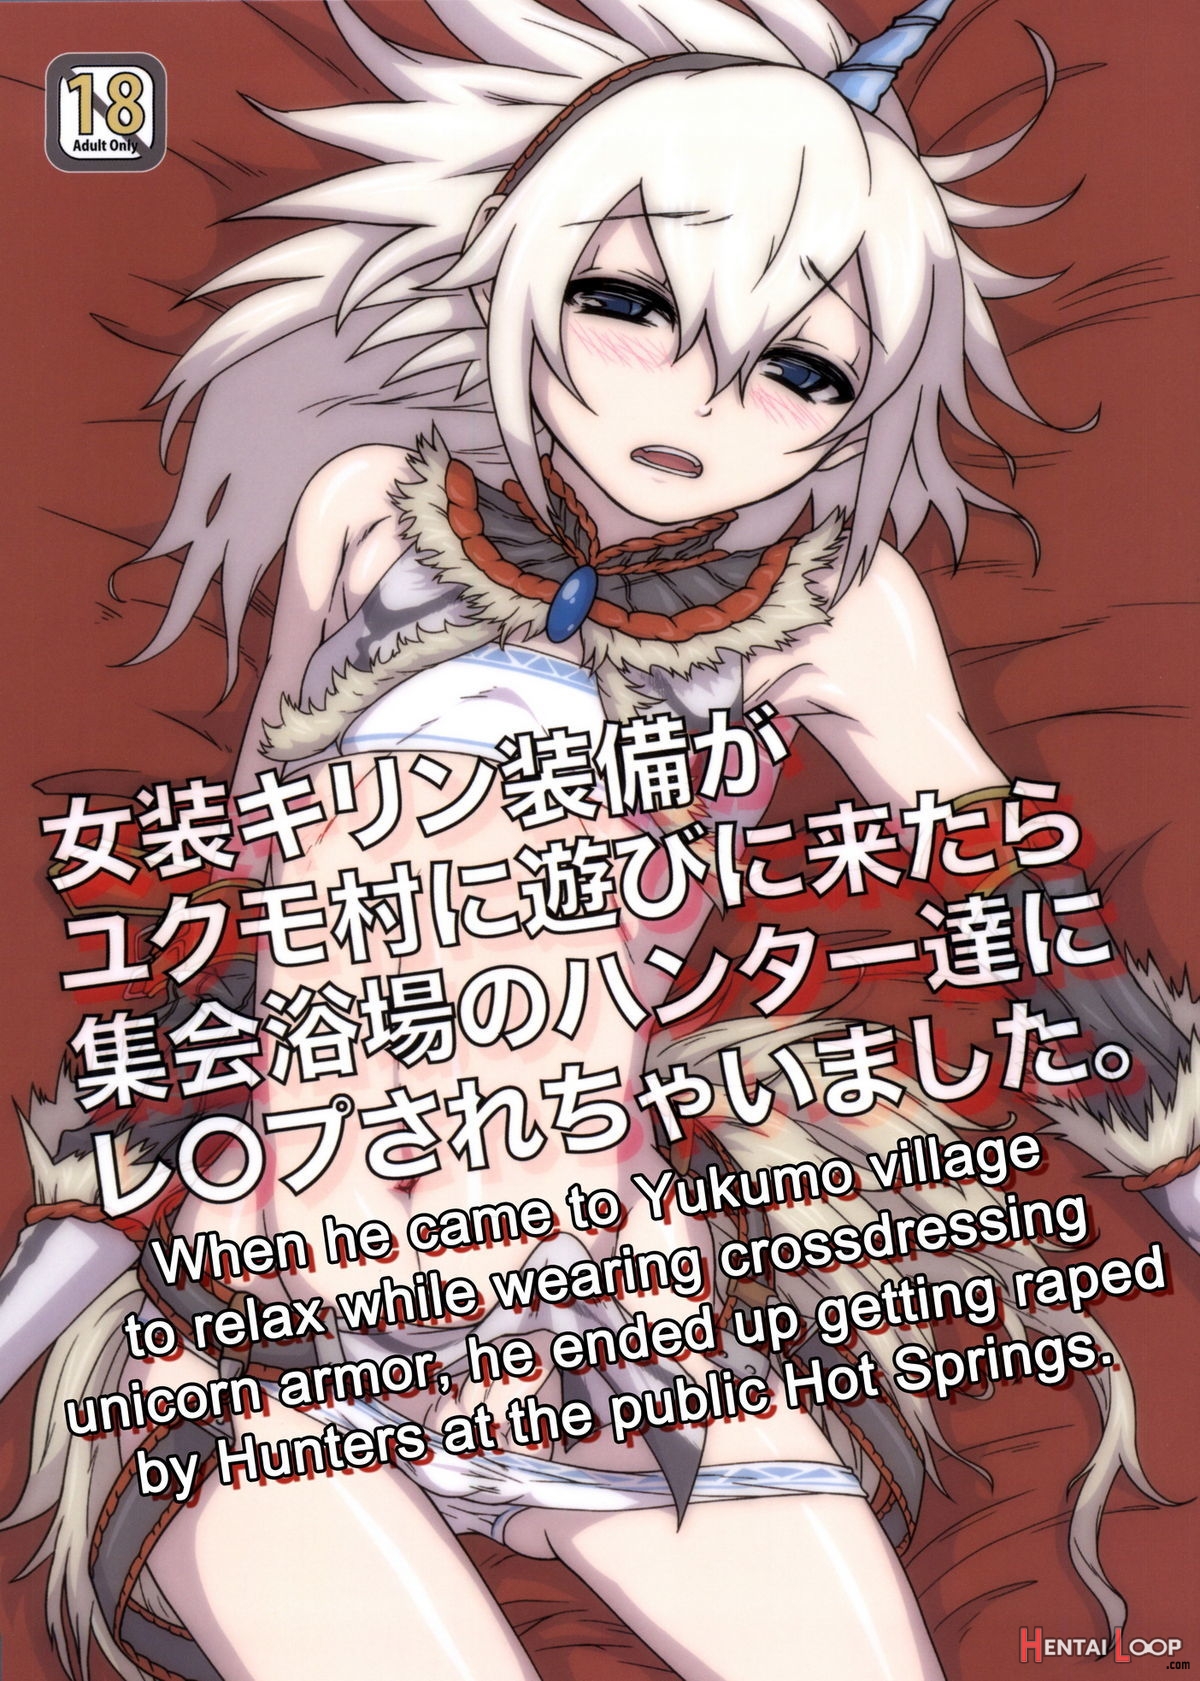 When He Came To Yukumo Village To Relax While Wearing Crossdressing Unicornarmor He Ended Up Getting Raped By Hunters At The Public Hot Springs page 1